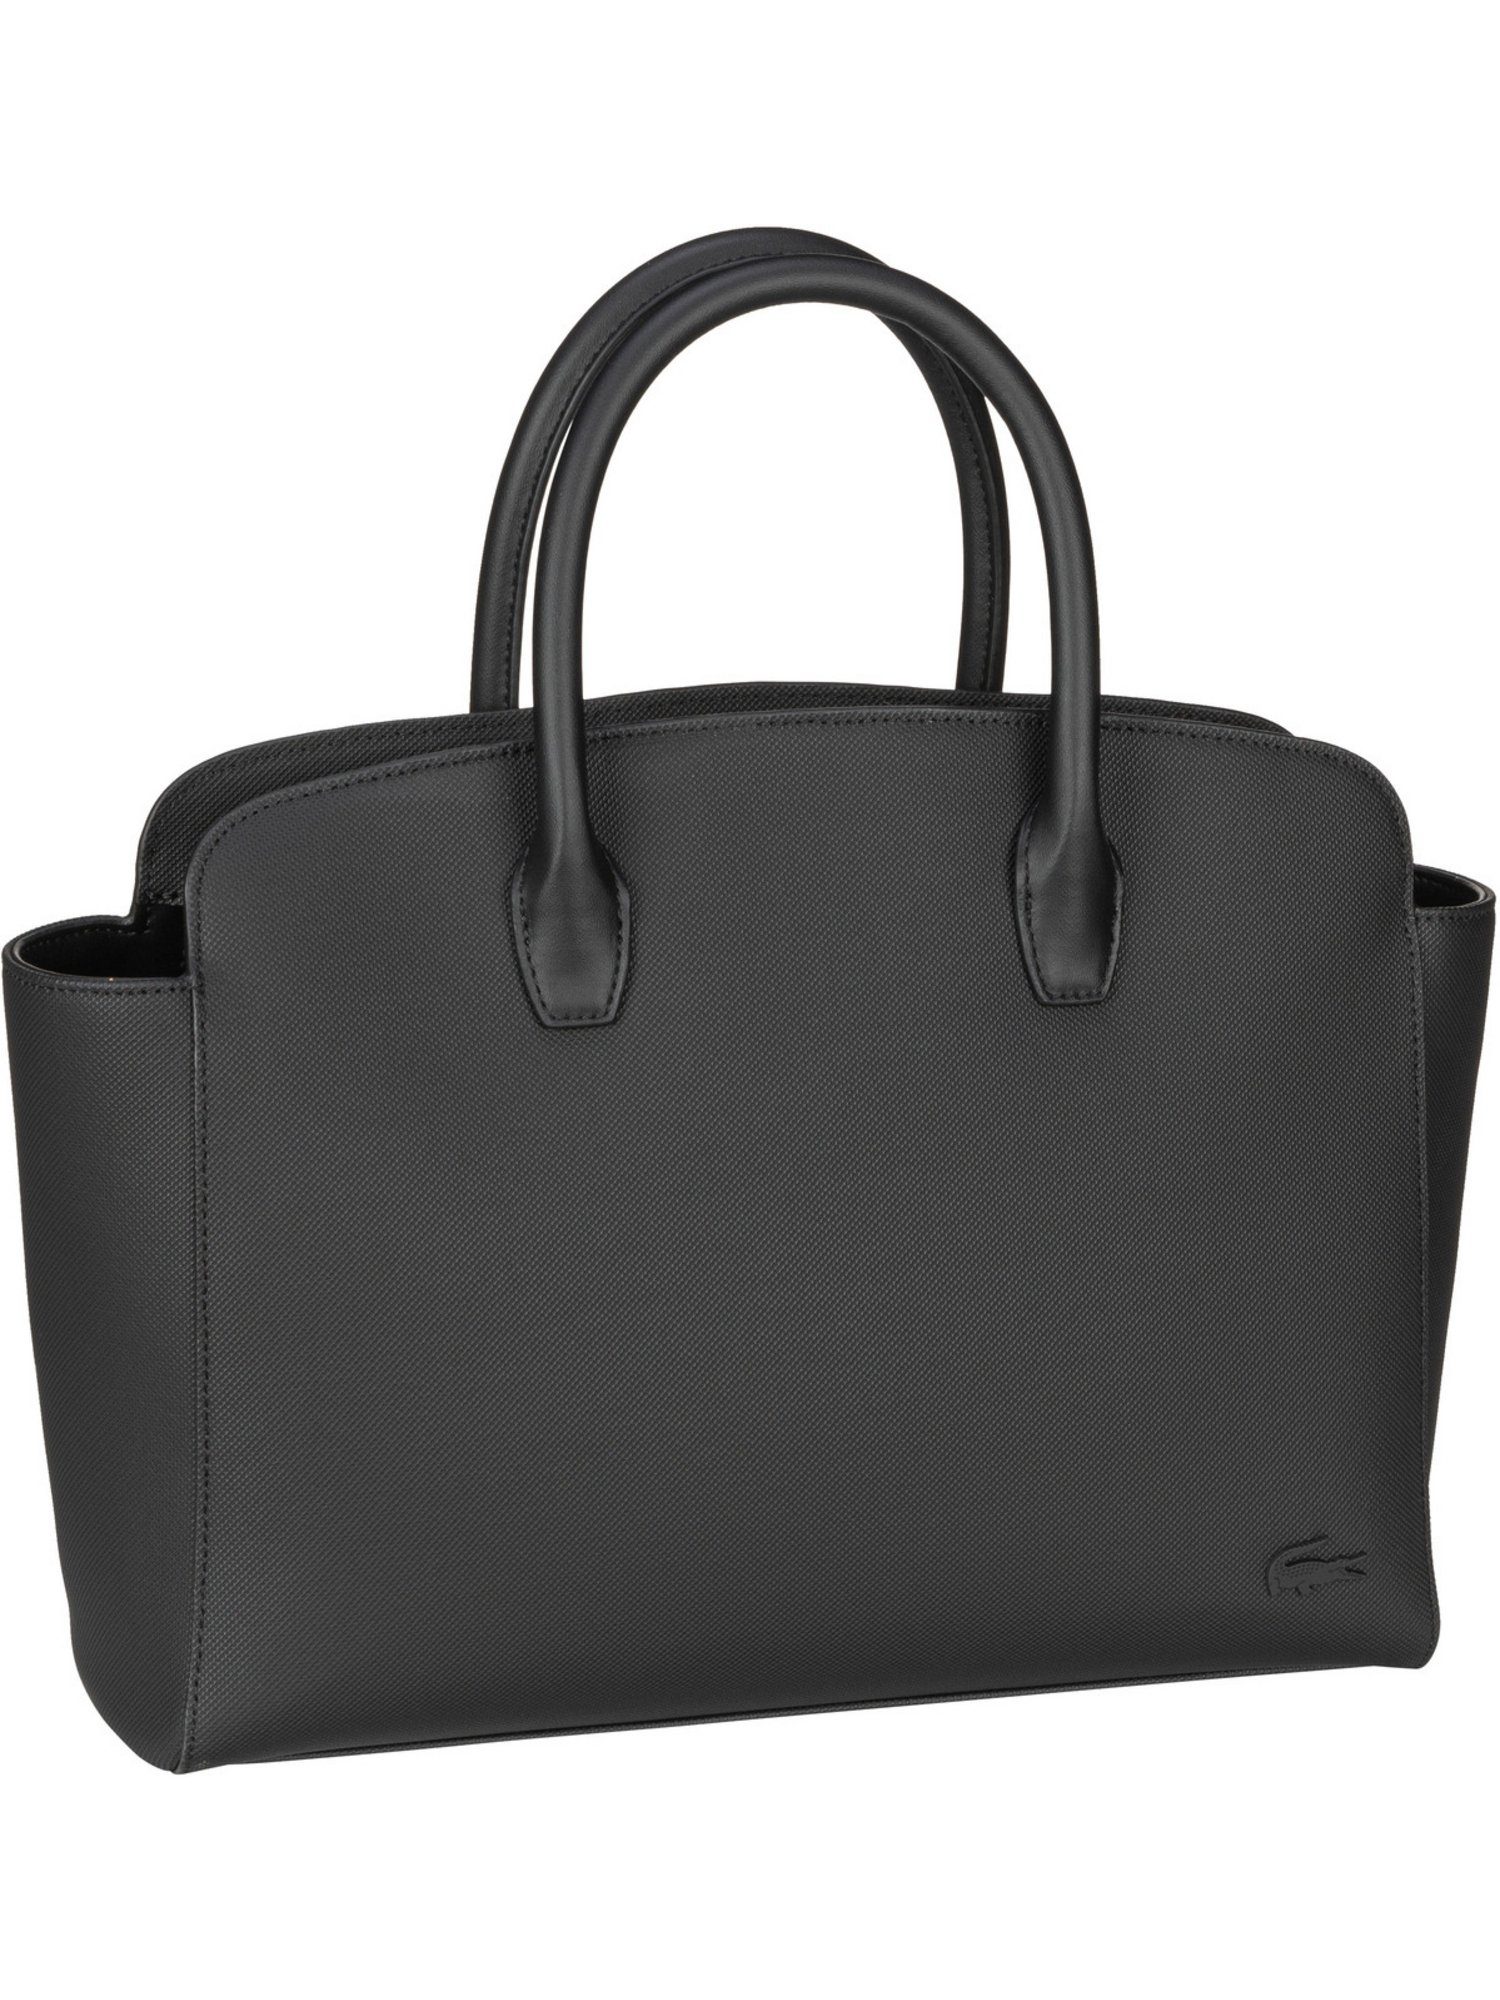 M Tote Handtasche Bag Top Bag Daily Handle 4092, Lacoste Lifestyle